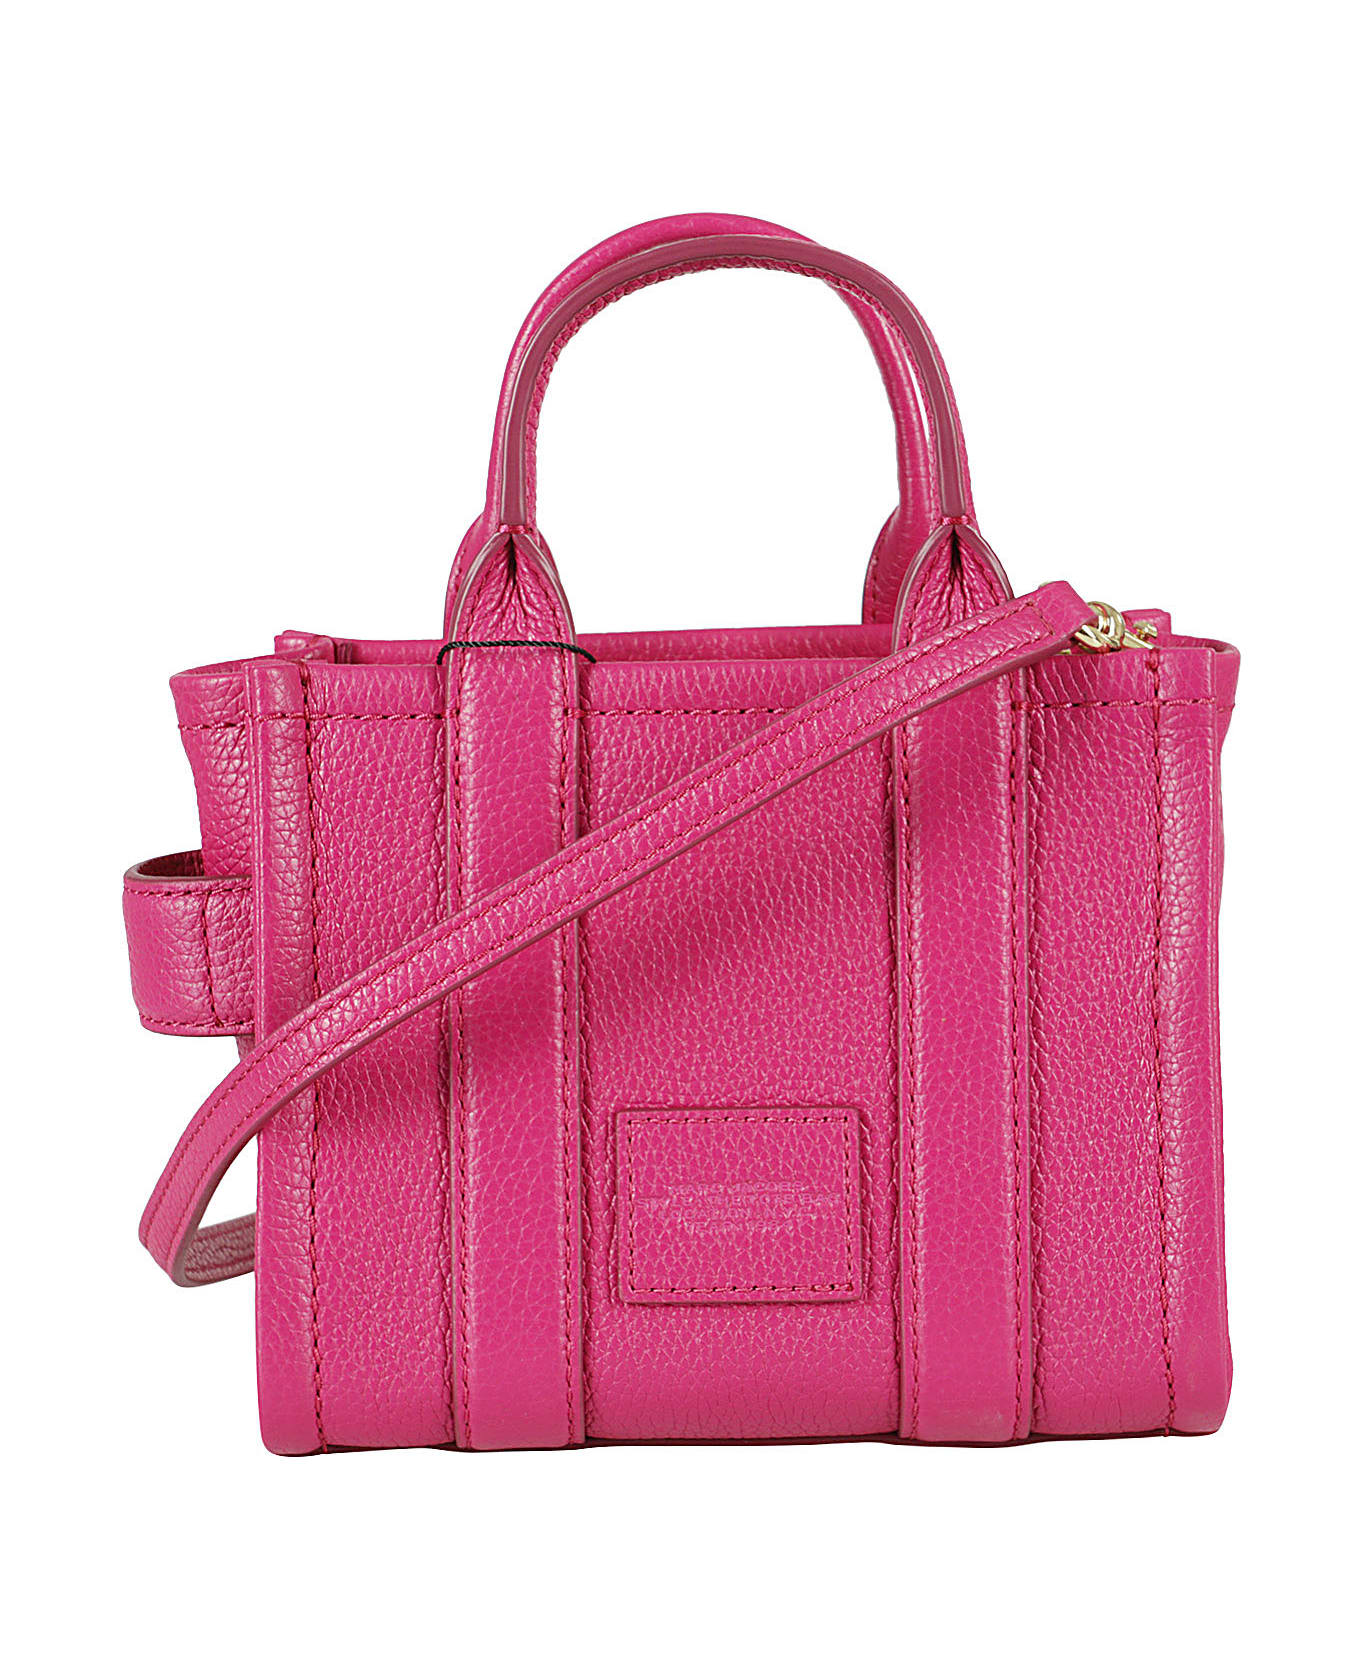 Marc Jacobs The Mini Tote - Lipstick Pink